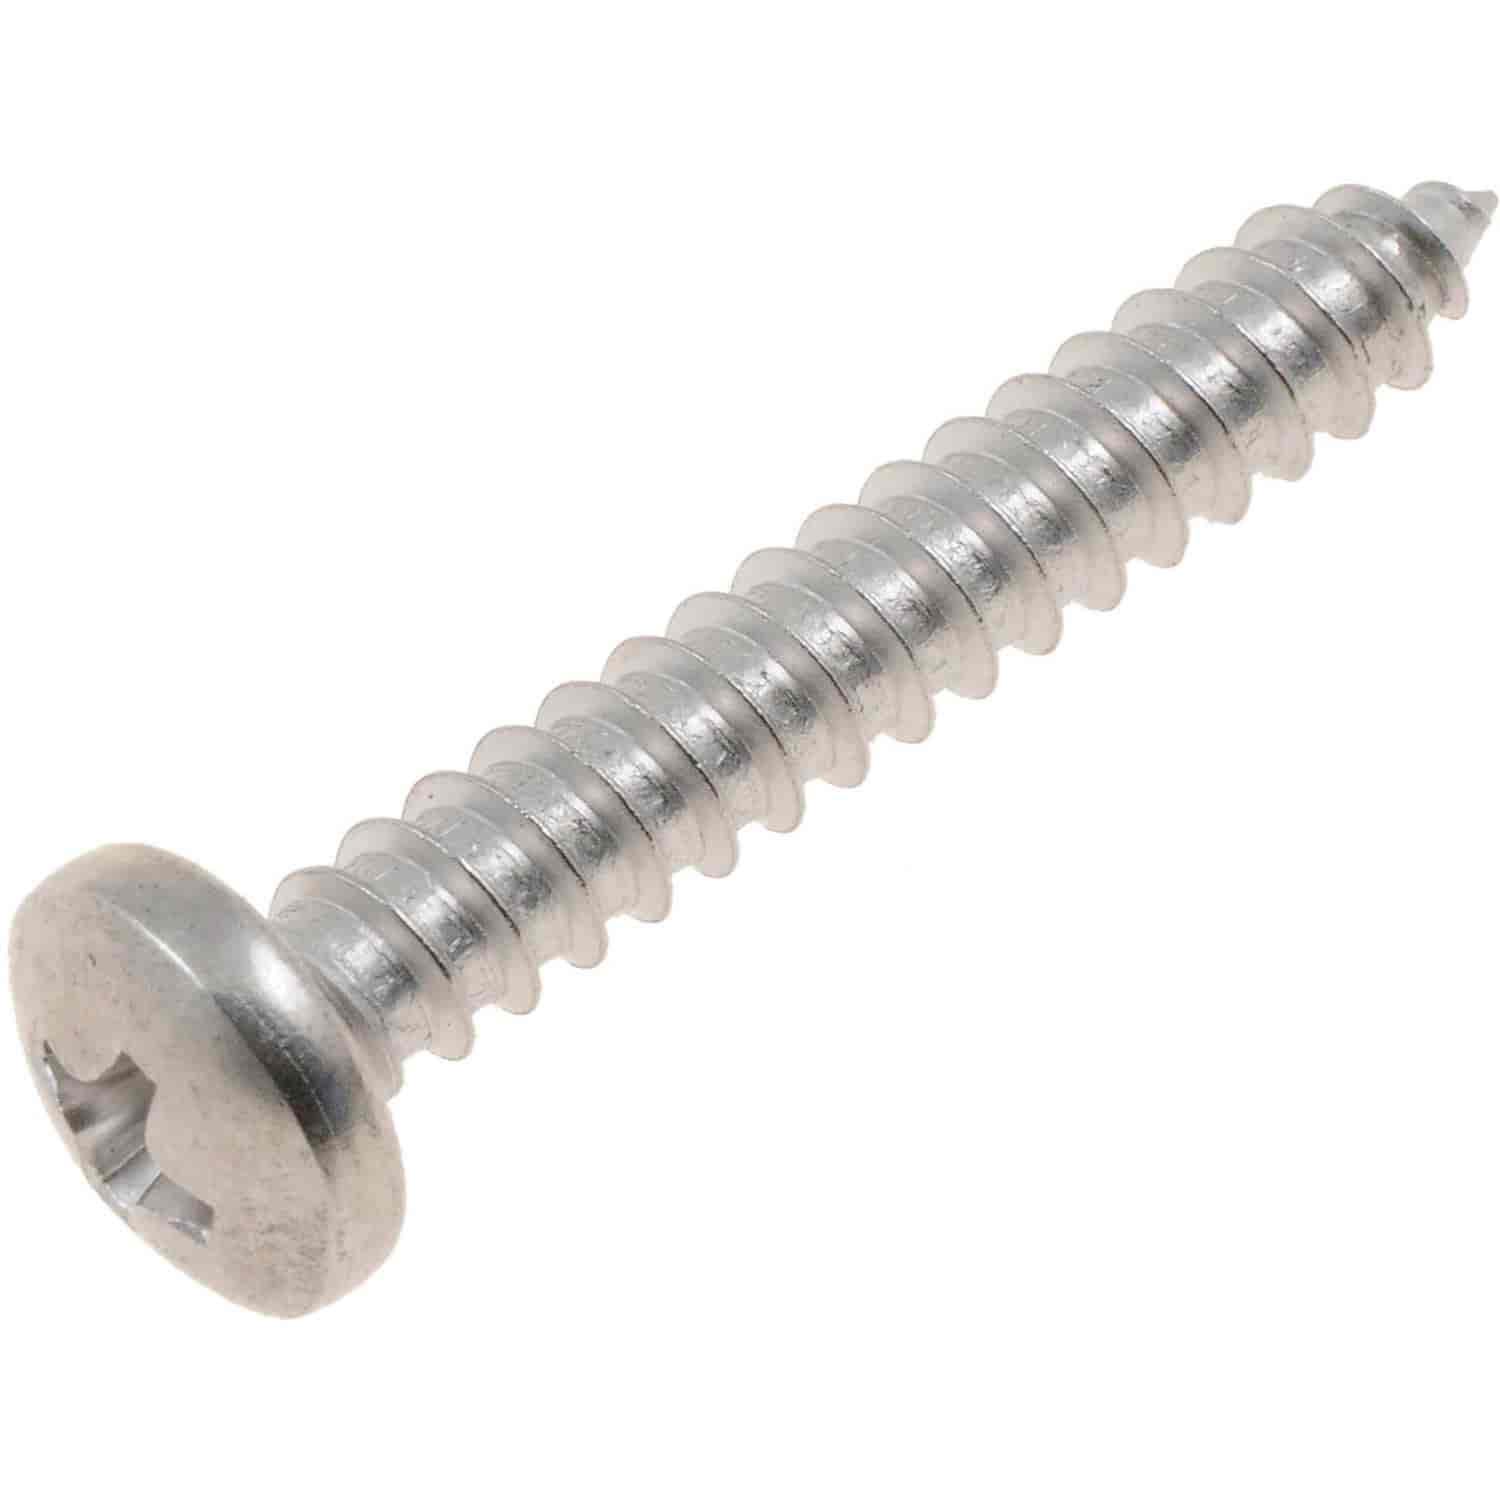 Self Tapping Screw-Stainless Steel-Pan Phillips Head-No. 10 x 1-1/4 In.